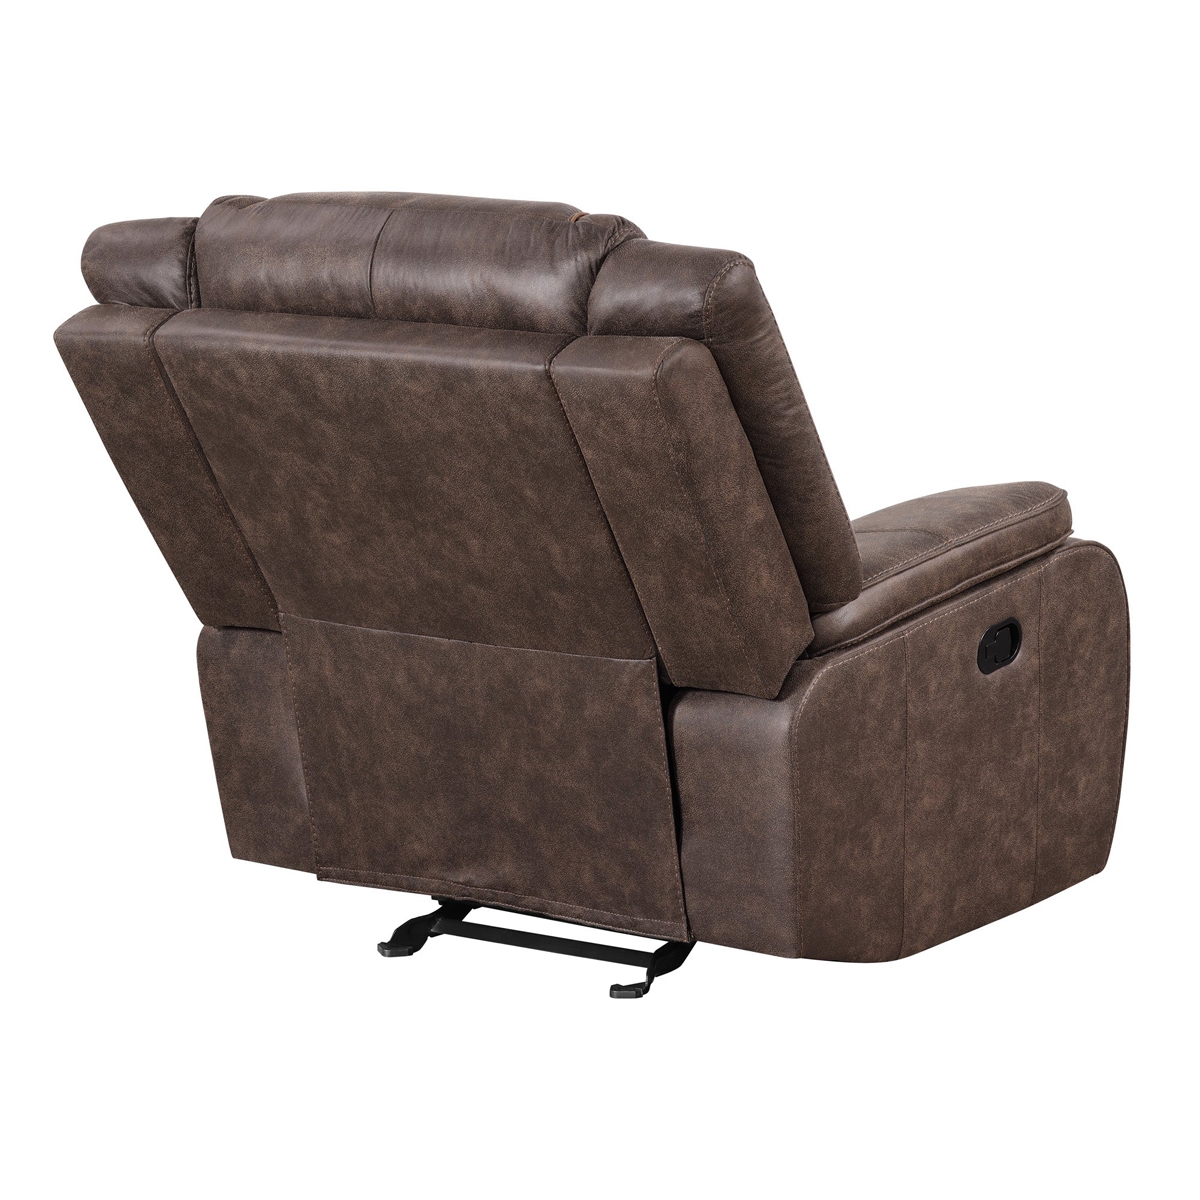 Picture of SHELTON MANUAL BROWN RECLINER